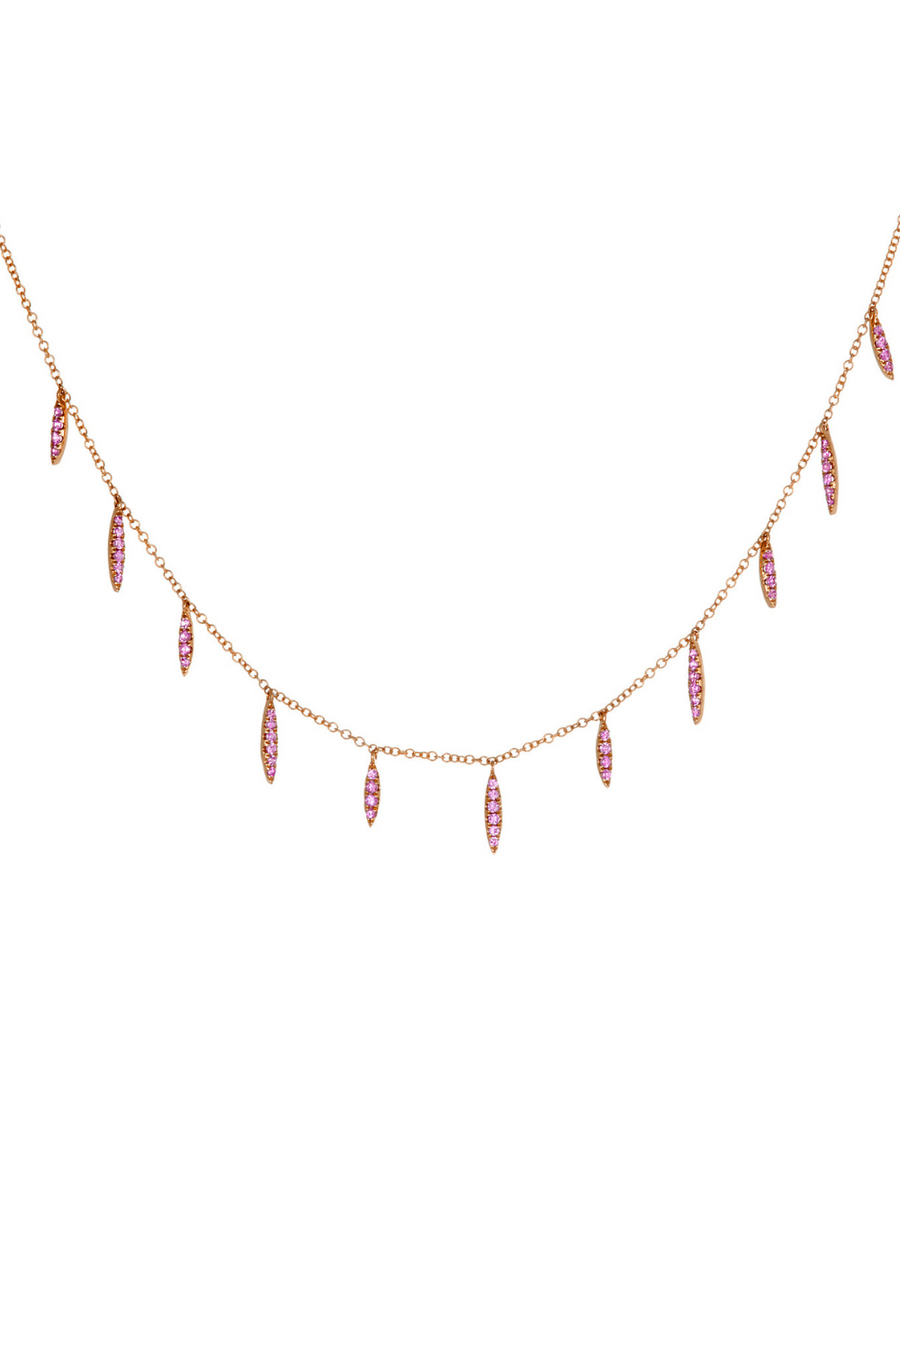 Eleven Wishes Deluxe Necklace in 14K Yellow Gold | Pink Sapphires